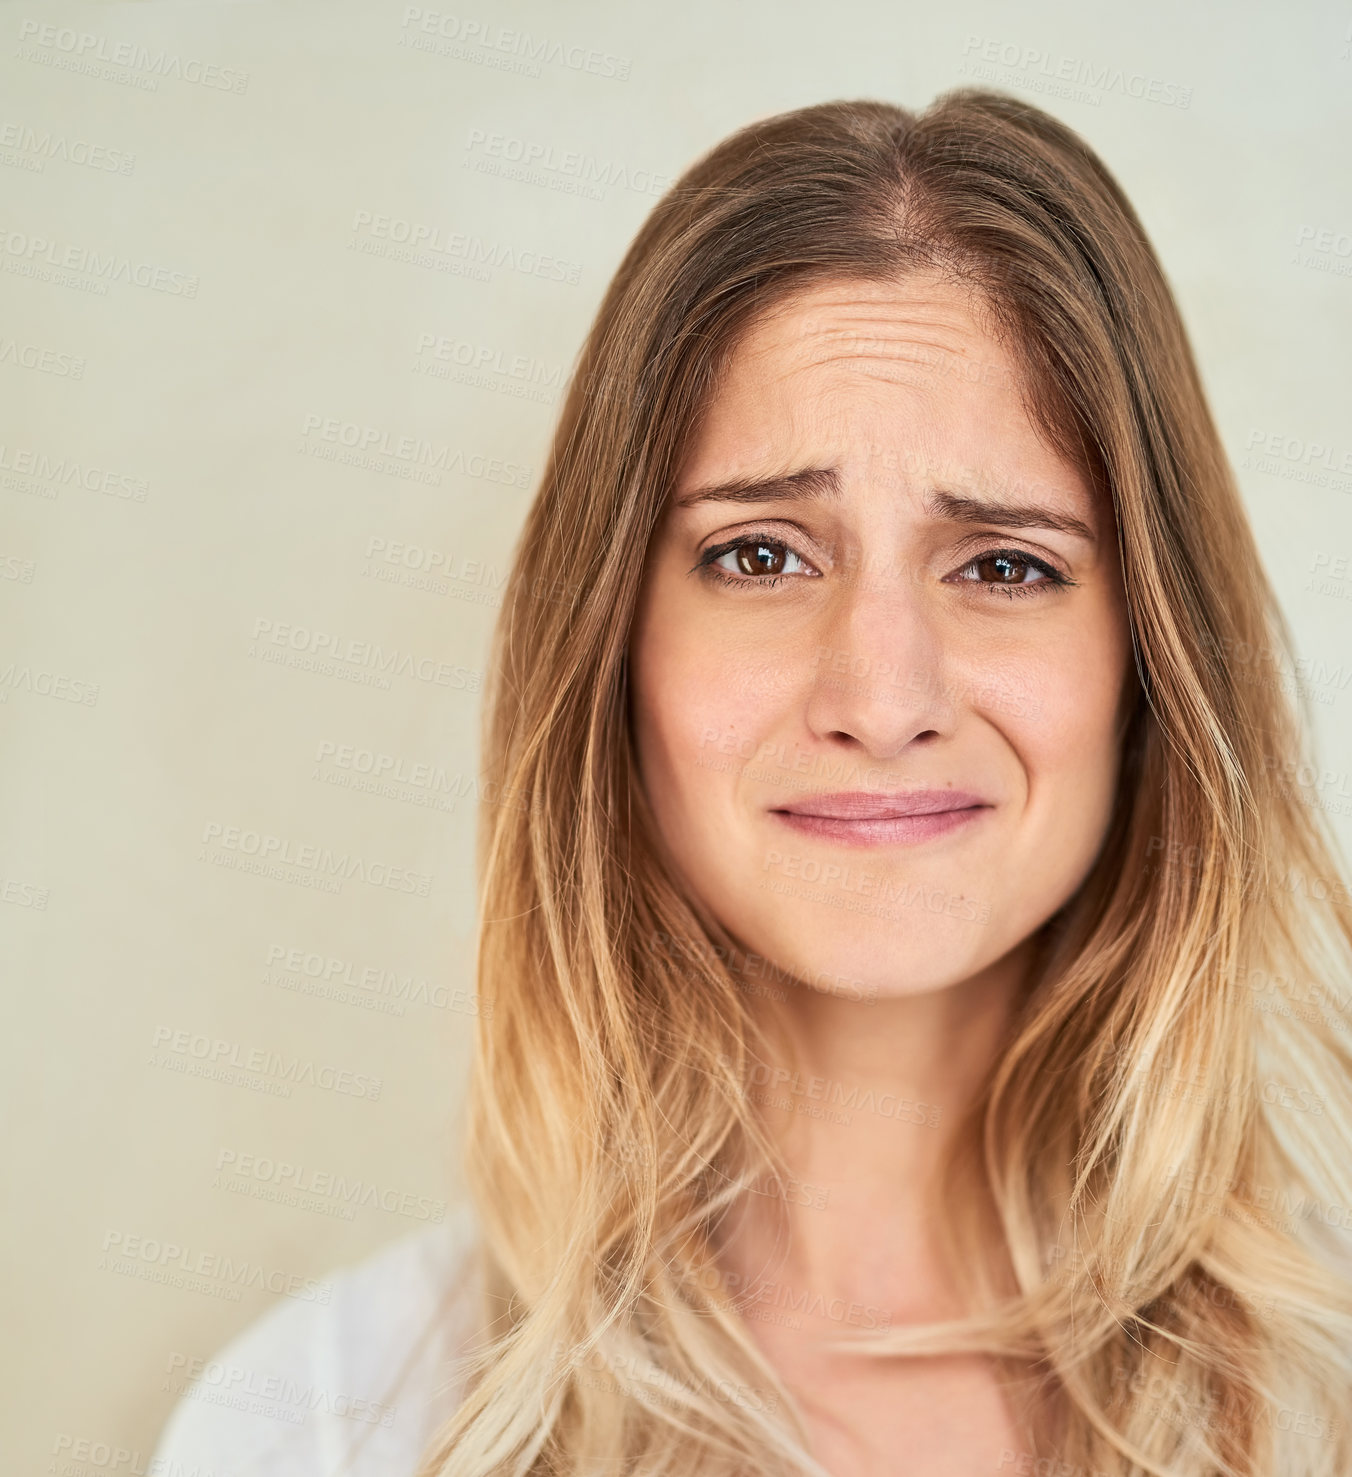 Buy stock photo Portrait of a young woman making a face in studio